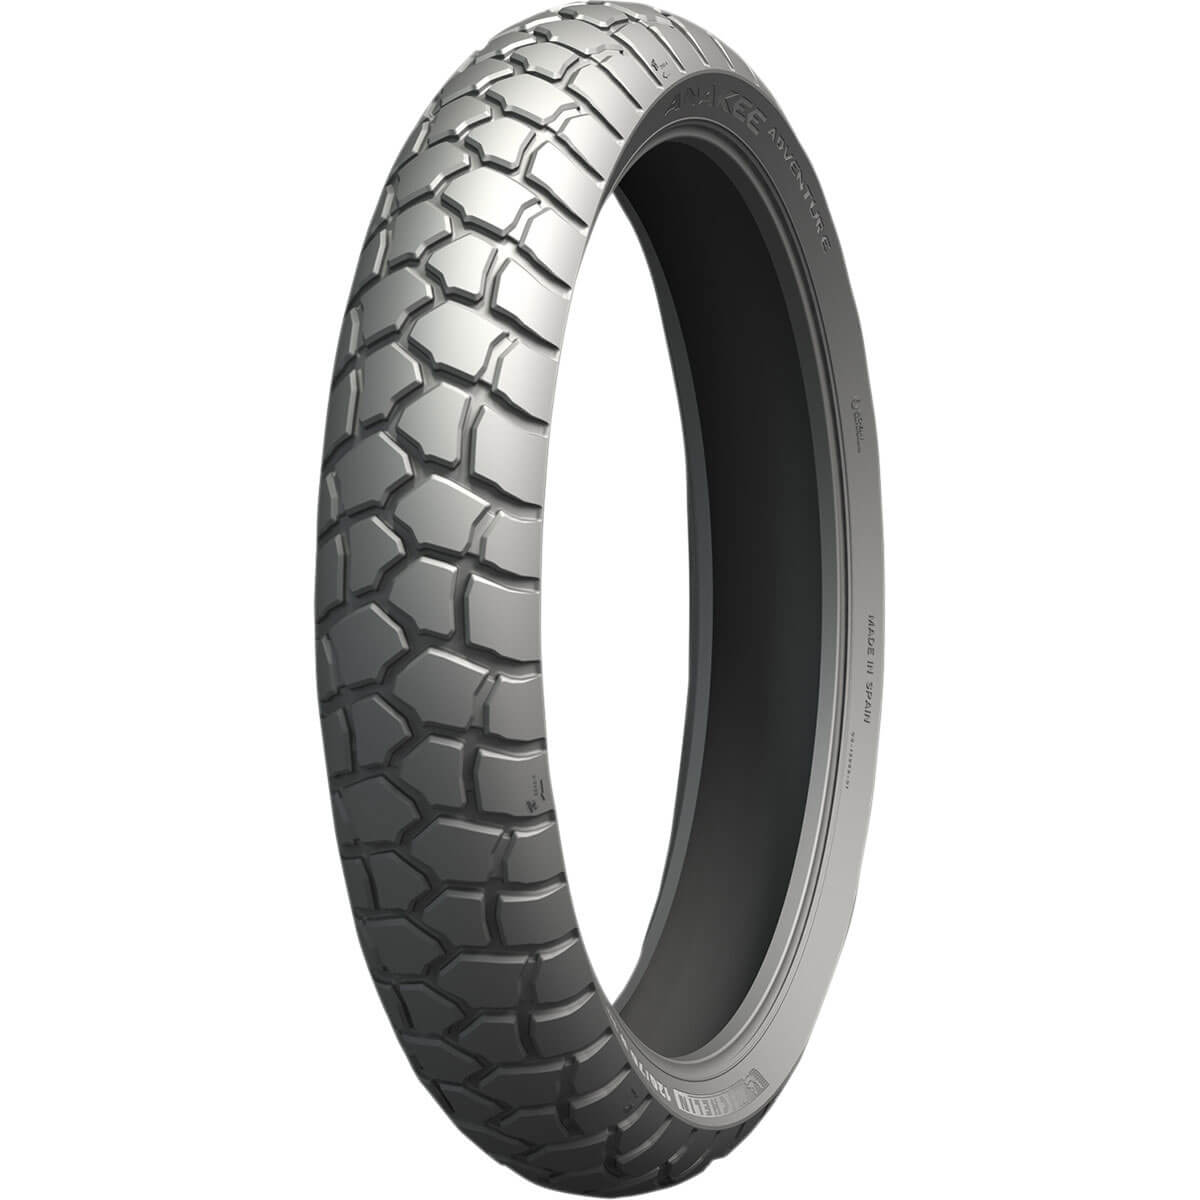 EAN 3528704901128, MICHELIN ANAKEE STREET FRONT M/C, 90/90 R21 54 T